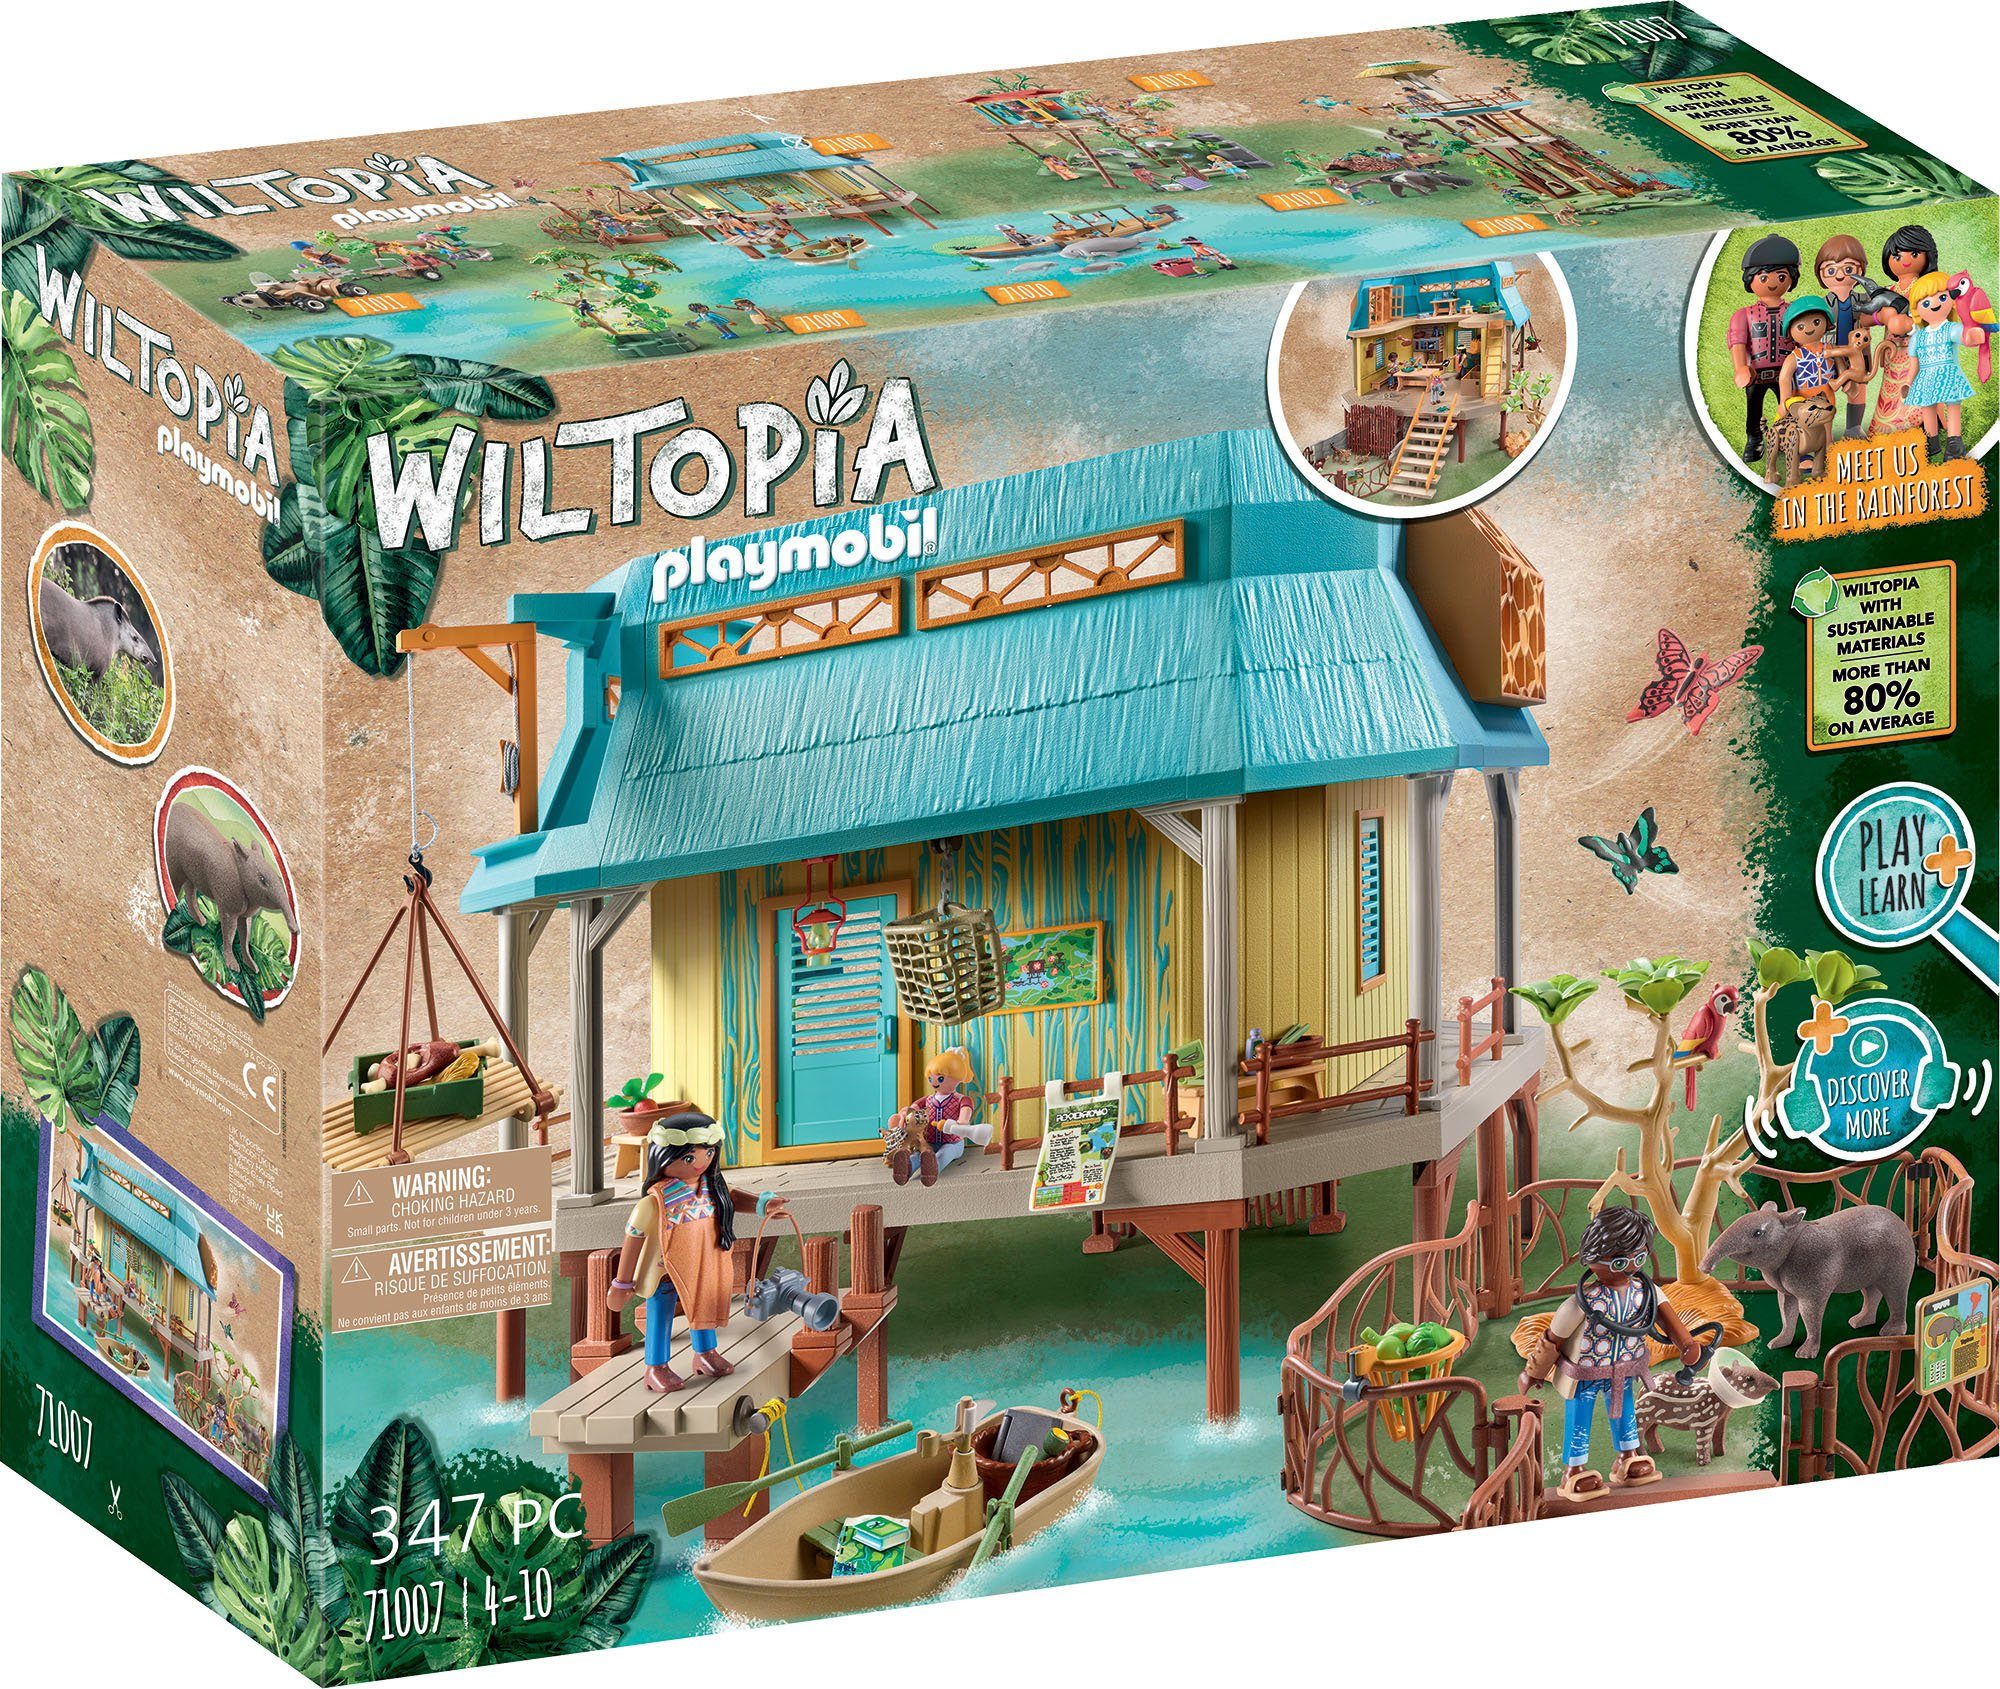 Playmobil® Konstruktions-Spielset »Wiltopia - Tierpflegestation (71007),  Wiltopia«, (347 St), teilweise aus recyceltem Material; Made in Europe